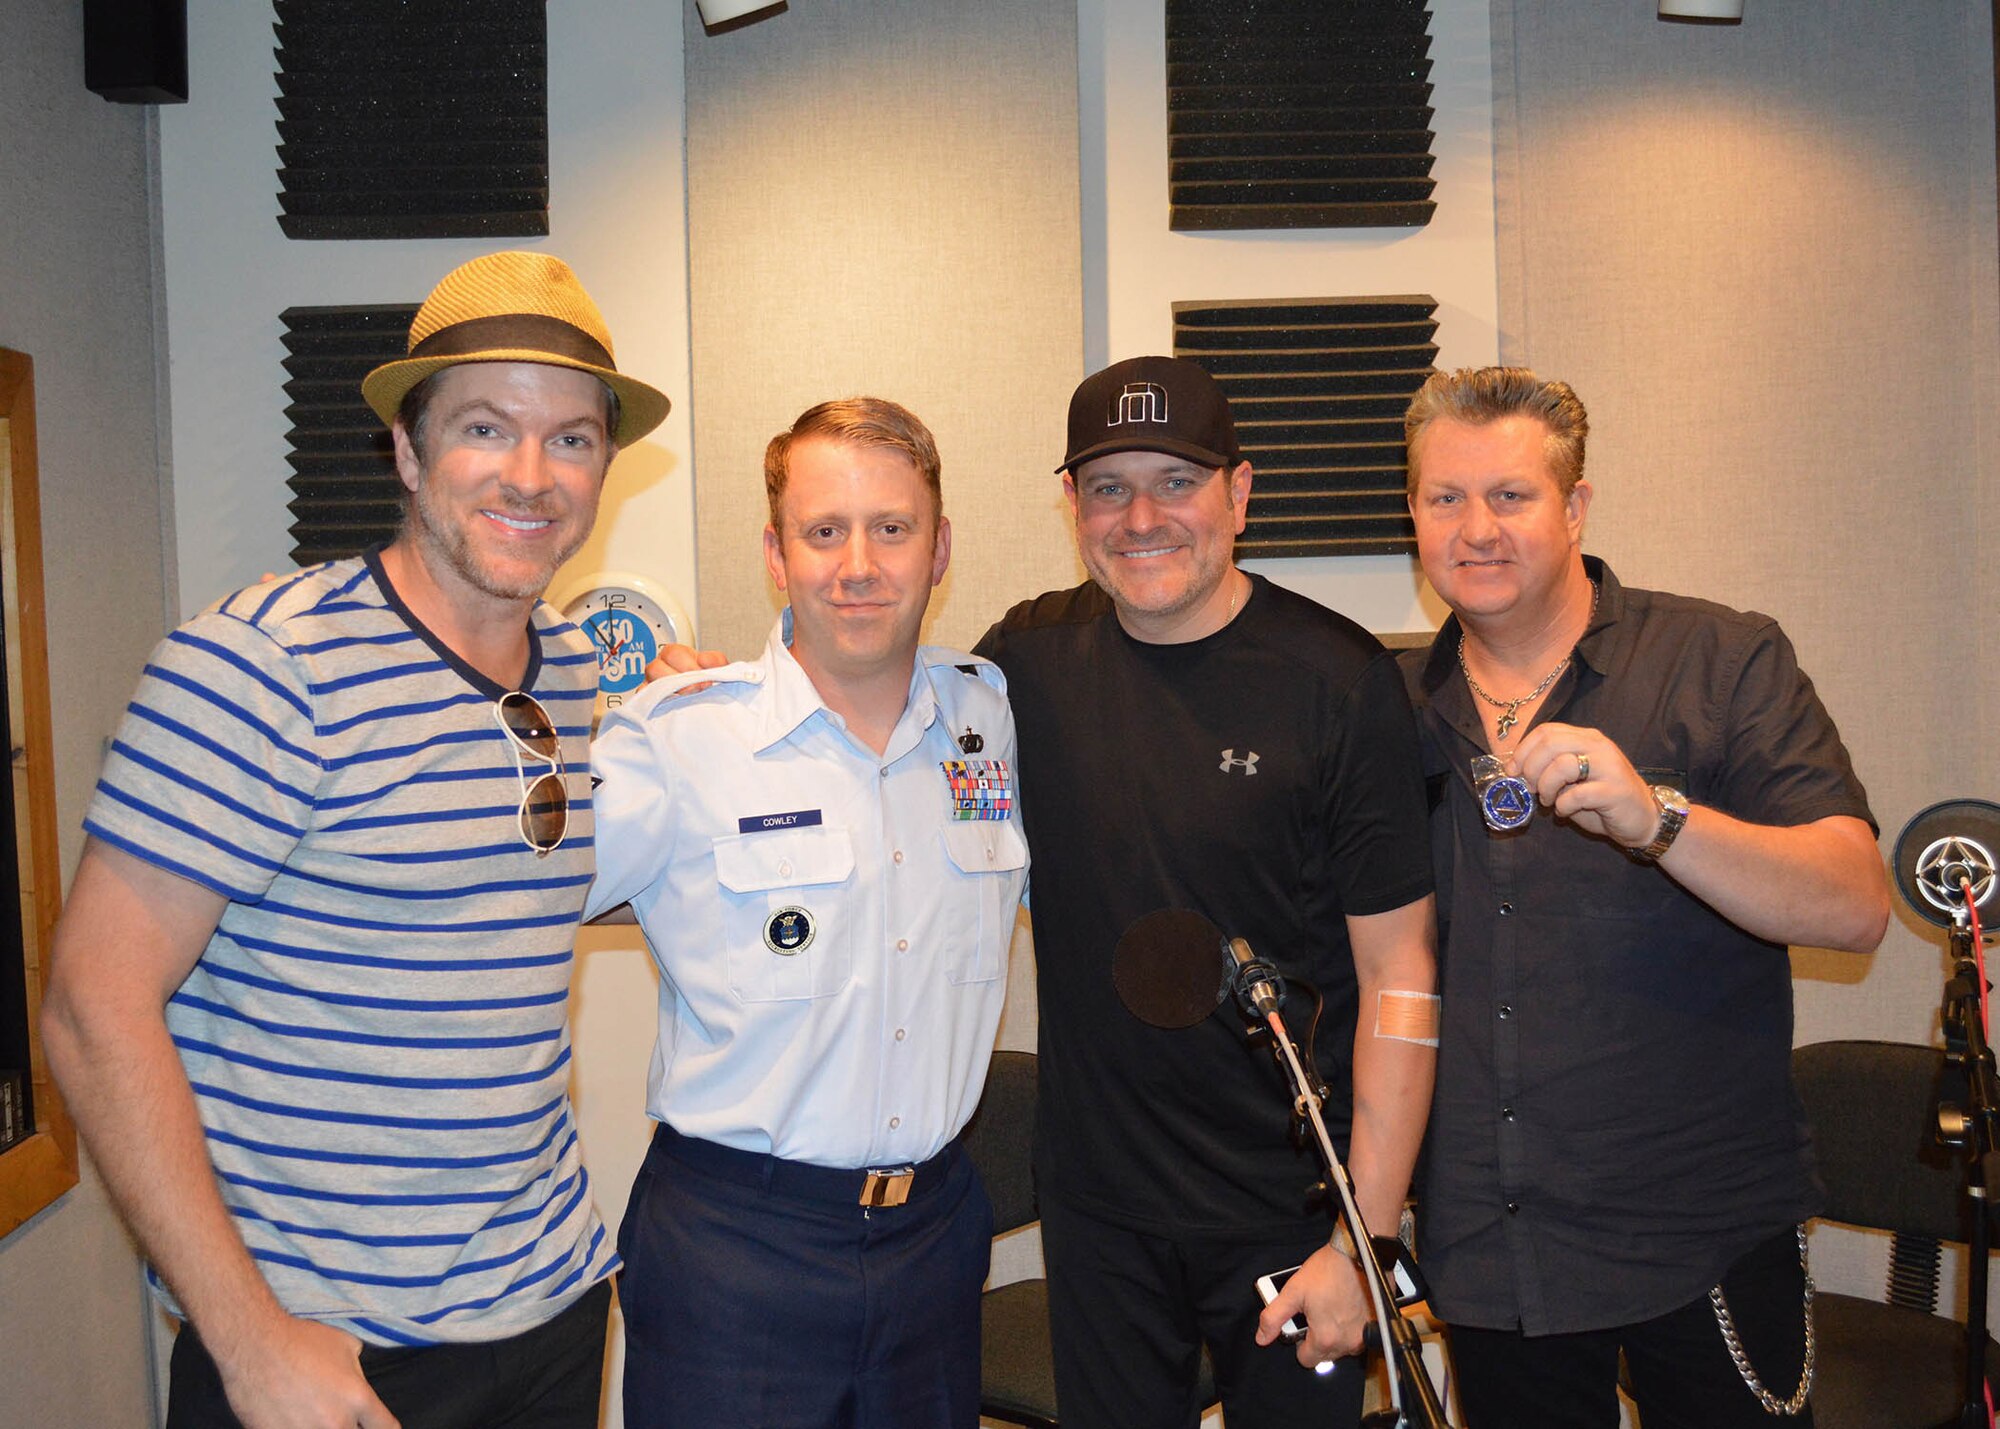 Rascal Flatts joins Air Force Tech. Sgt. Michael Cowley for this year’s Red, White and Air Force Blue Christmas. The one-hour radio special will air during the upcoming holiday season on stations throughout the United States and the American Forces Network. Air Force Recruiting Service produces the show. (Courtesy photo/Lyndon LaFevers)